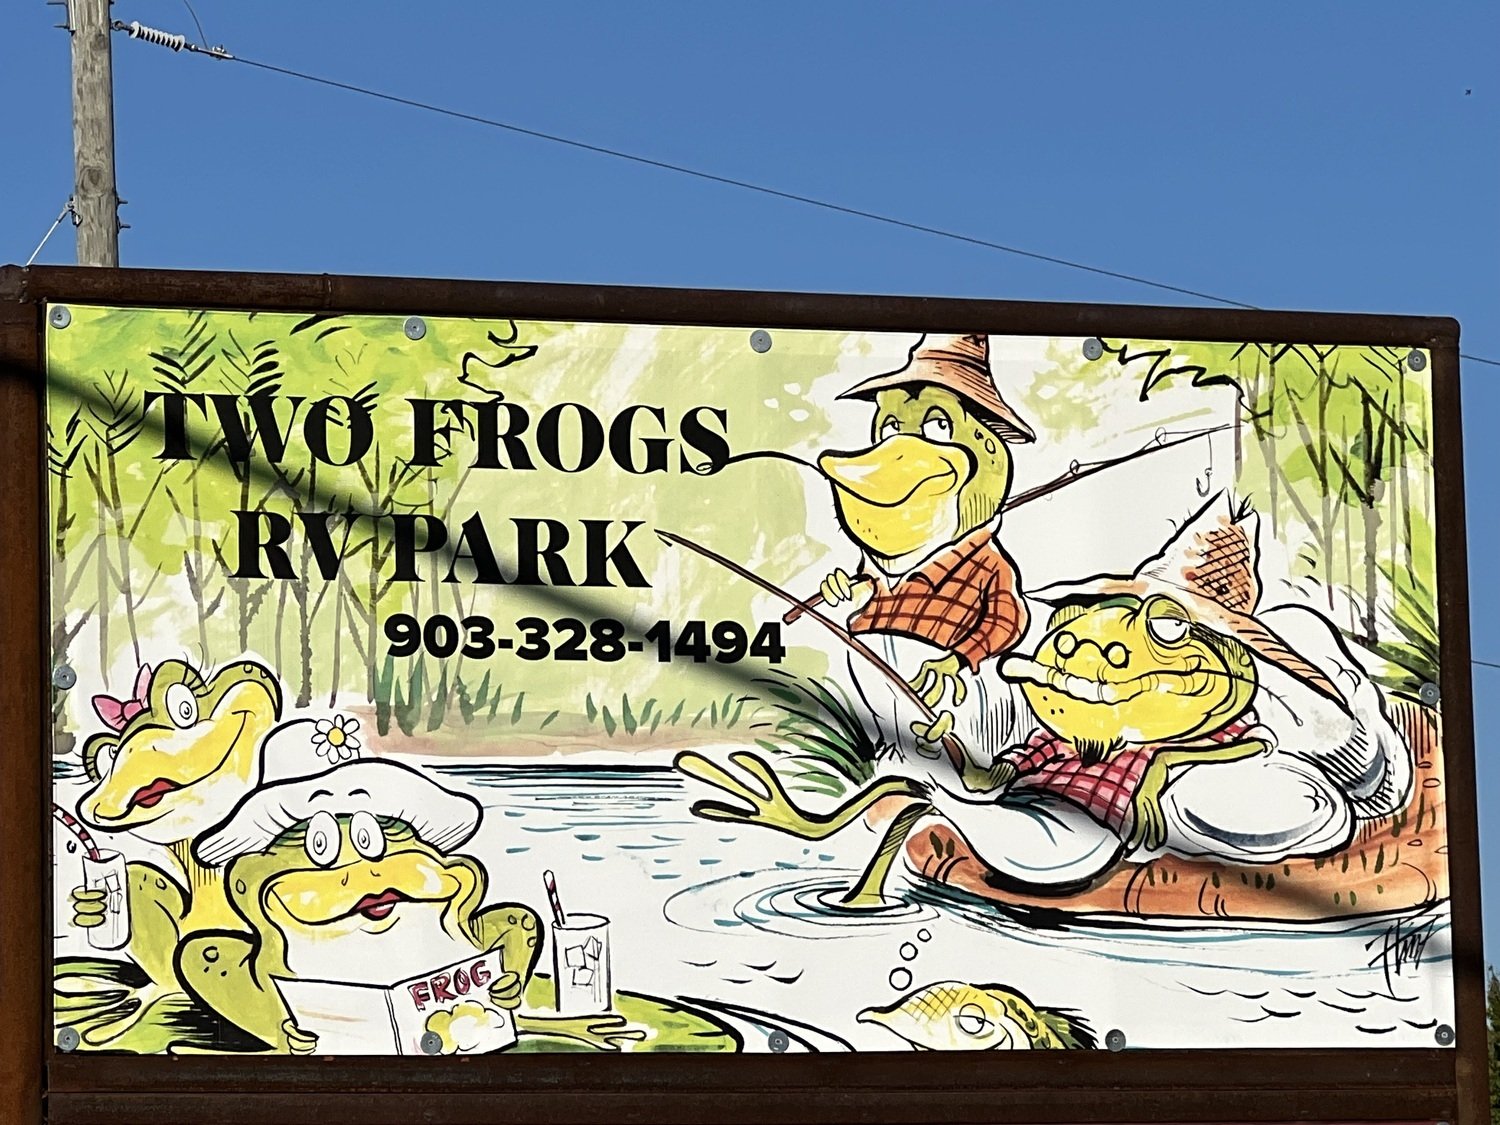 Two Frogs RV Park